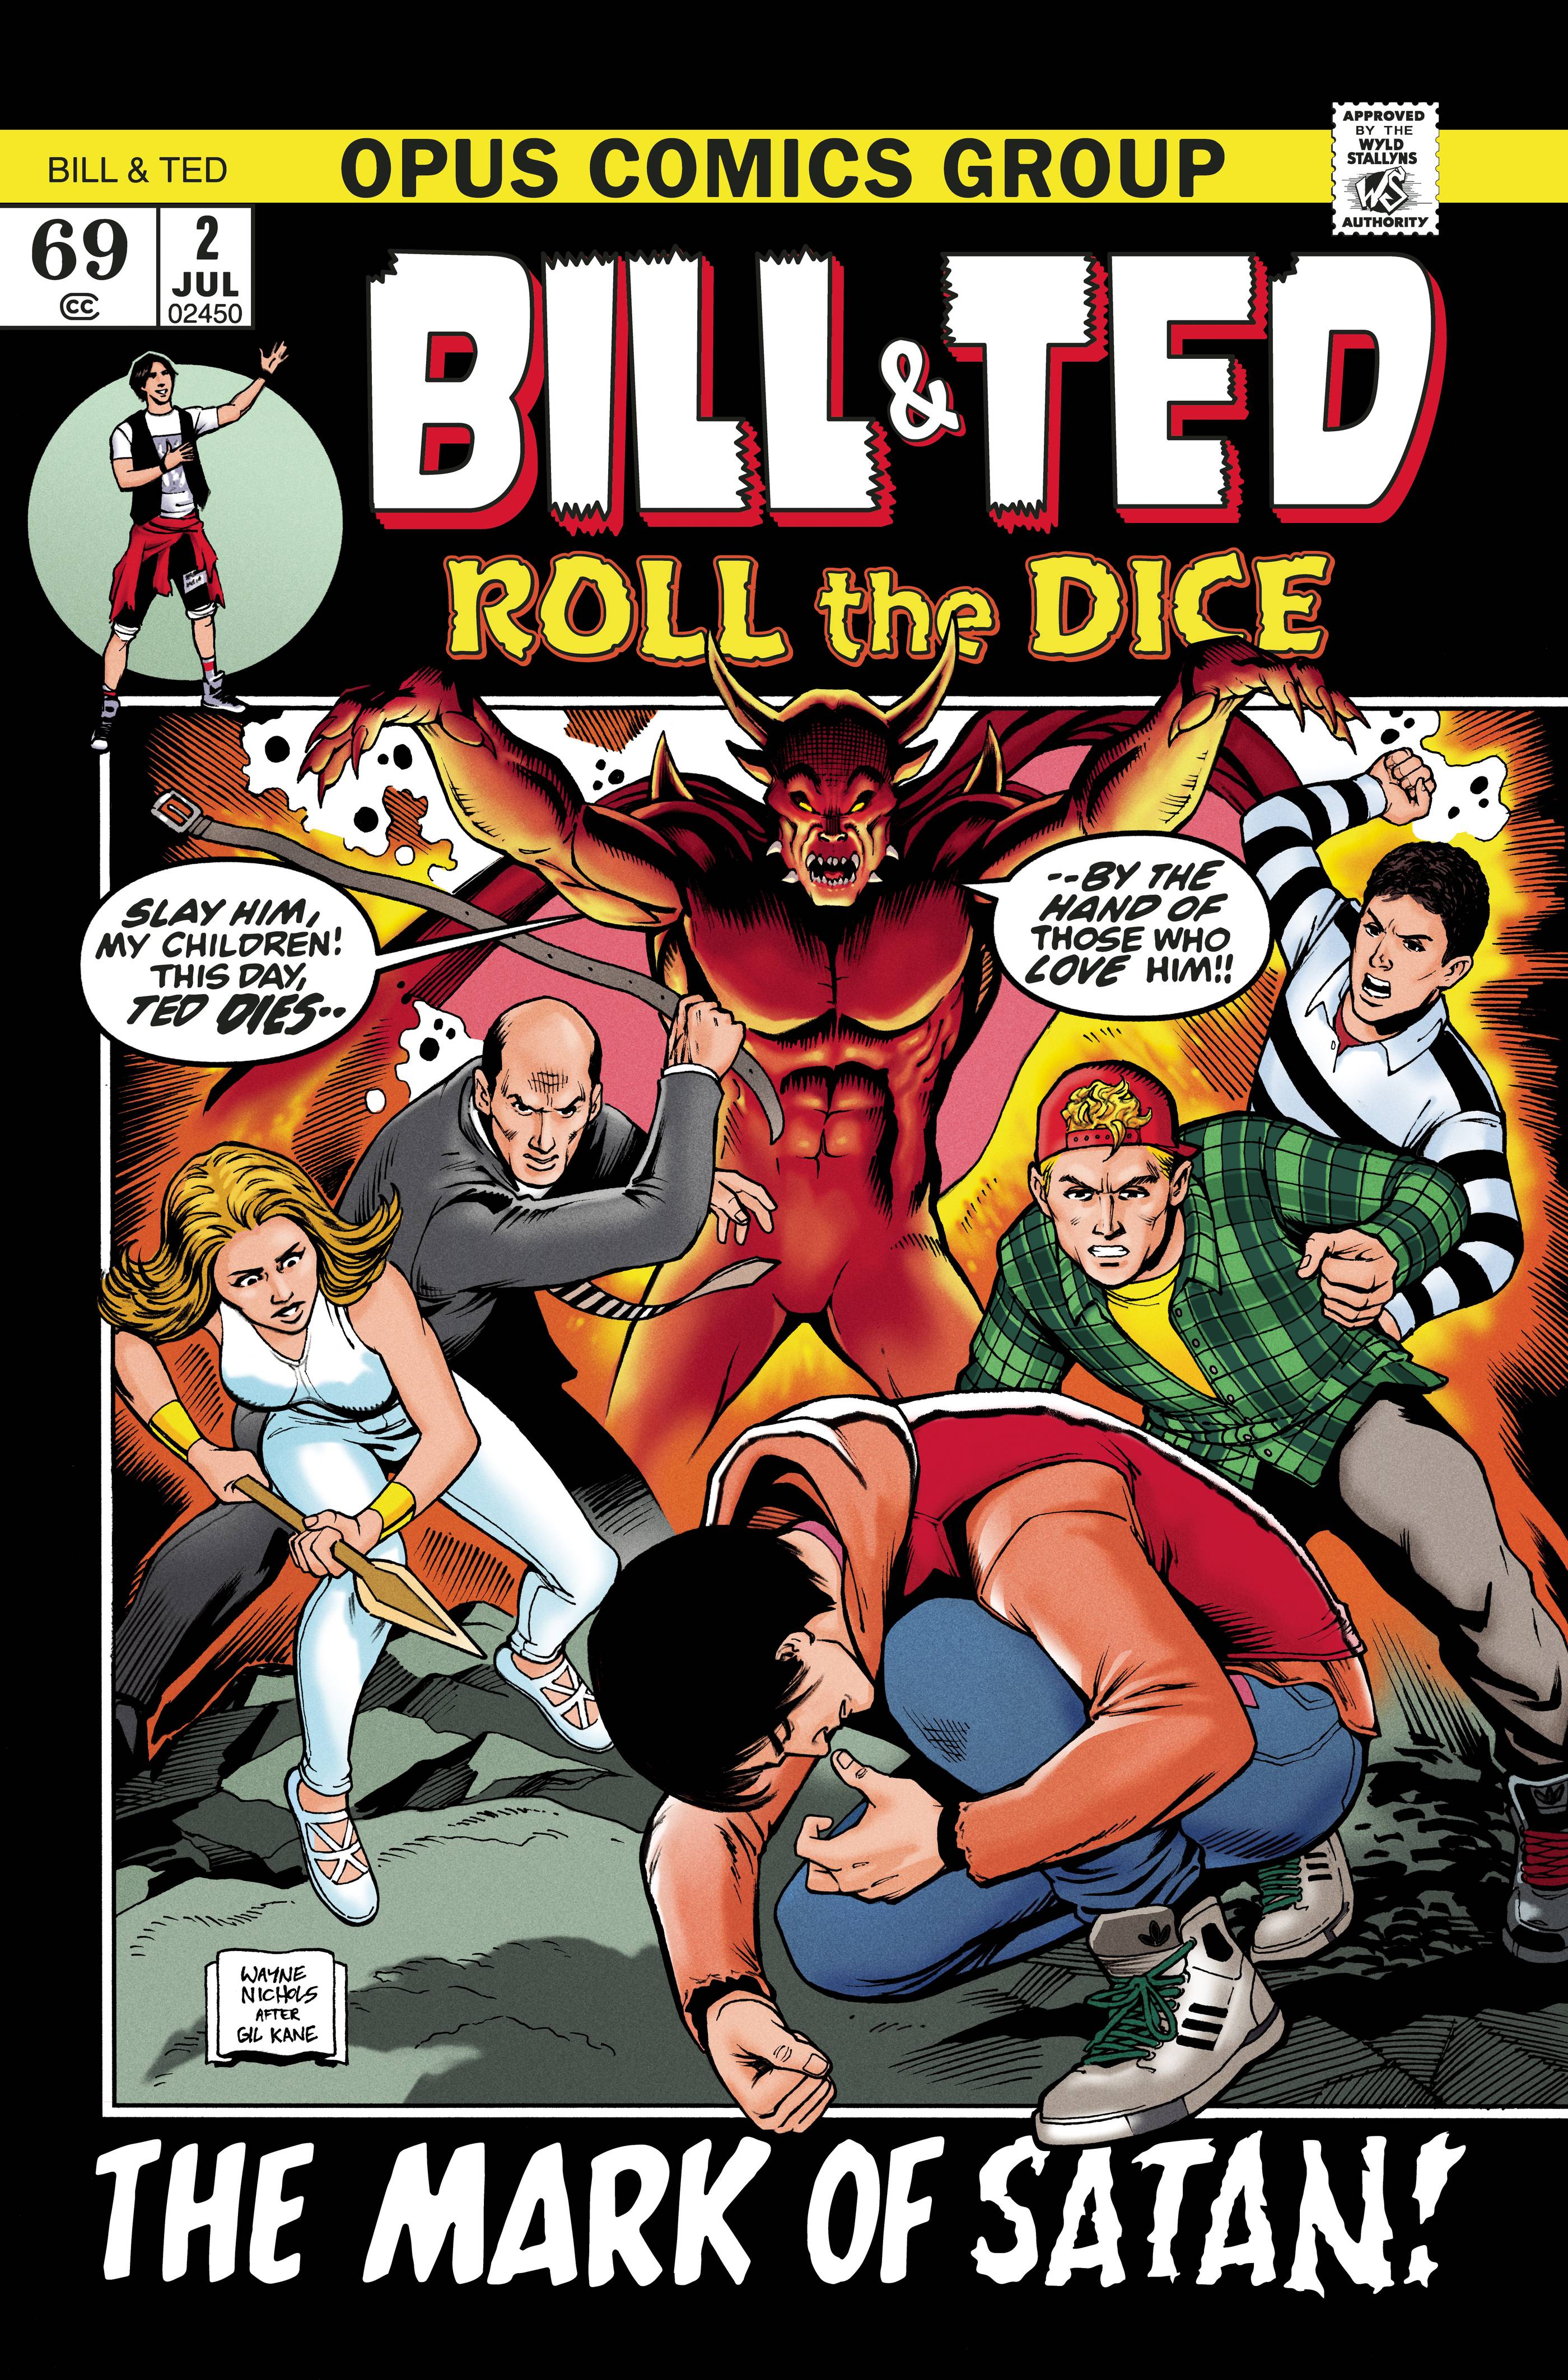 Bill & Ted Roll Dice #2 Cover C 1 for 5 Incentive Nichols